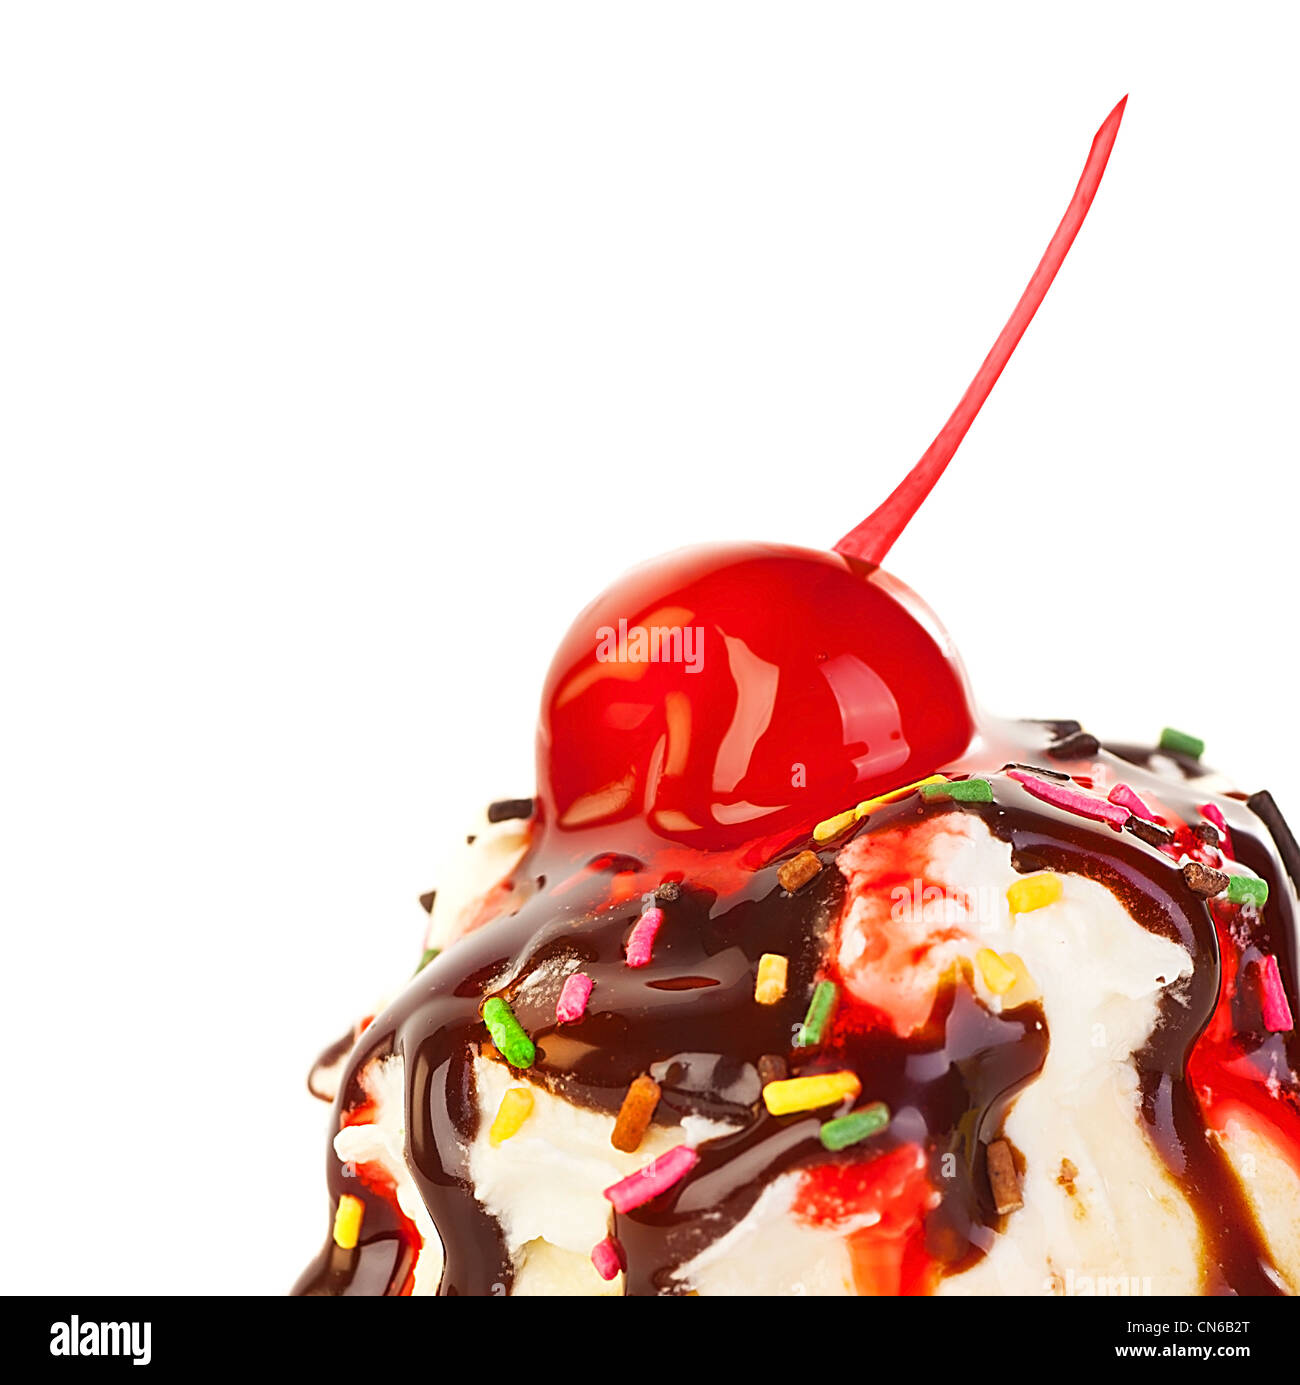 Ice cream border, frozen sweet yogurt topped with chocolate and strawberry syrup, decorated with cherry berry Stock Photo